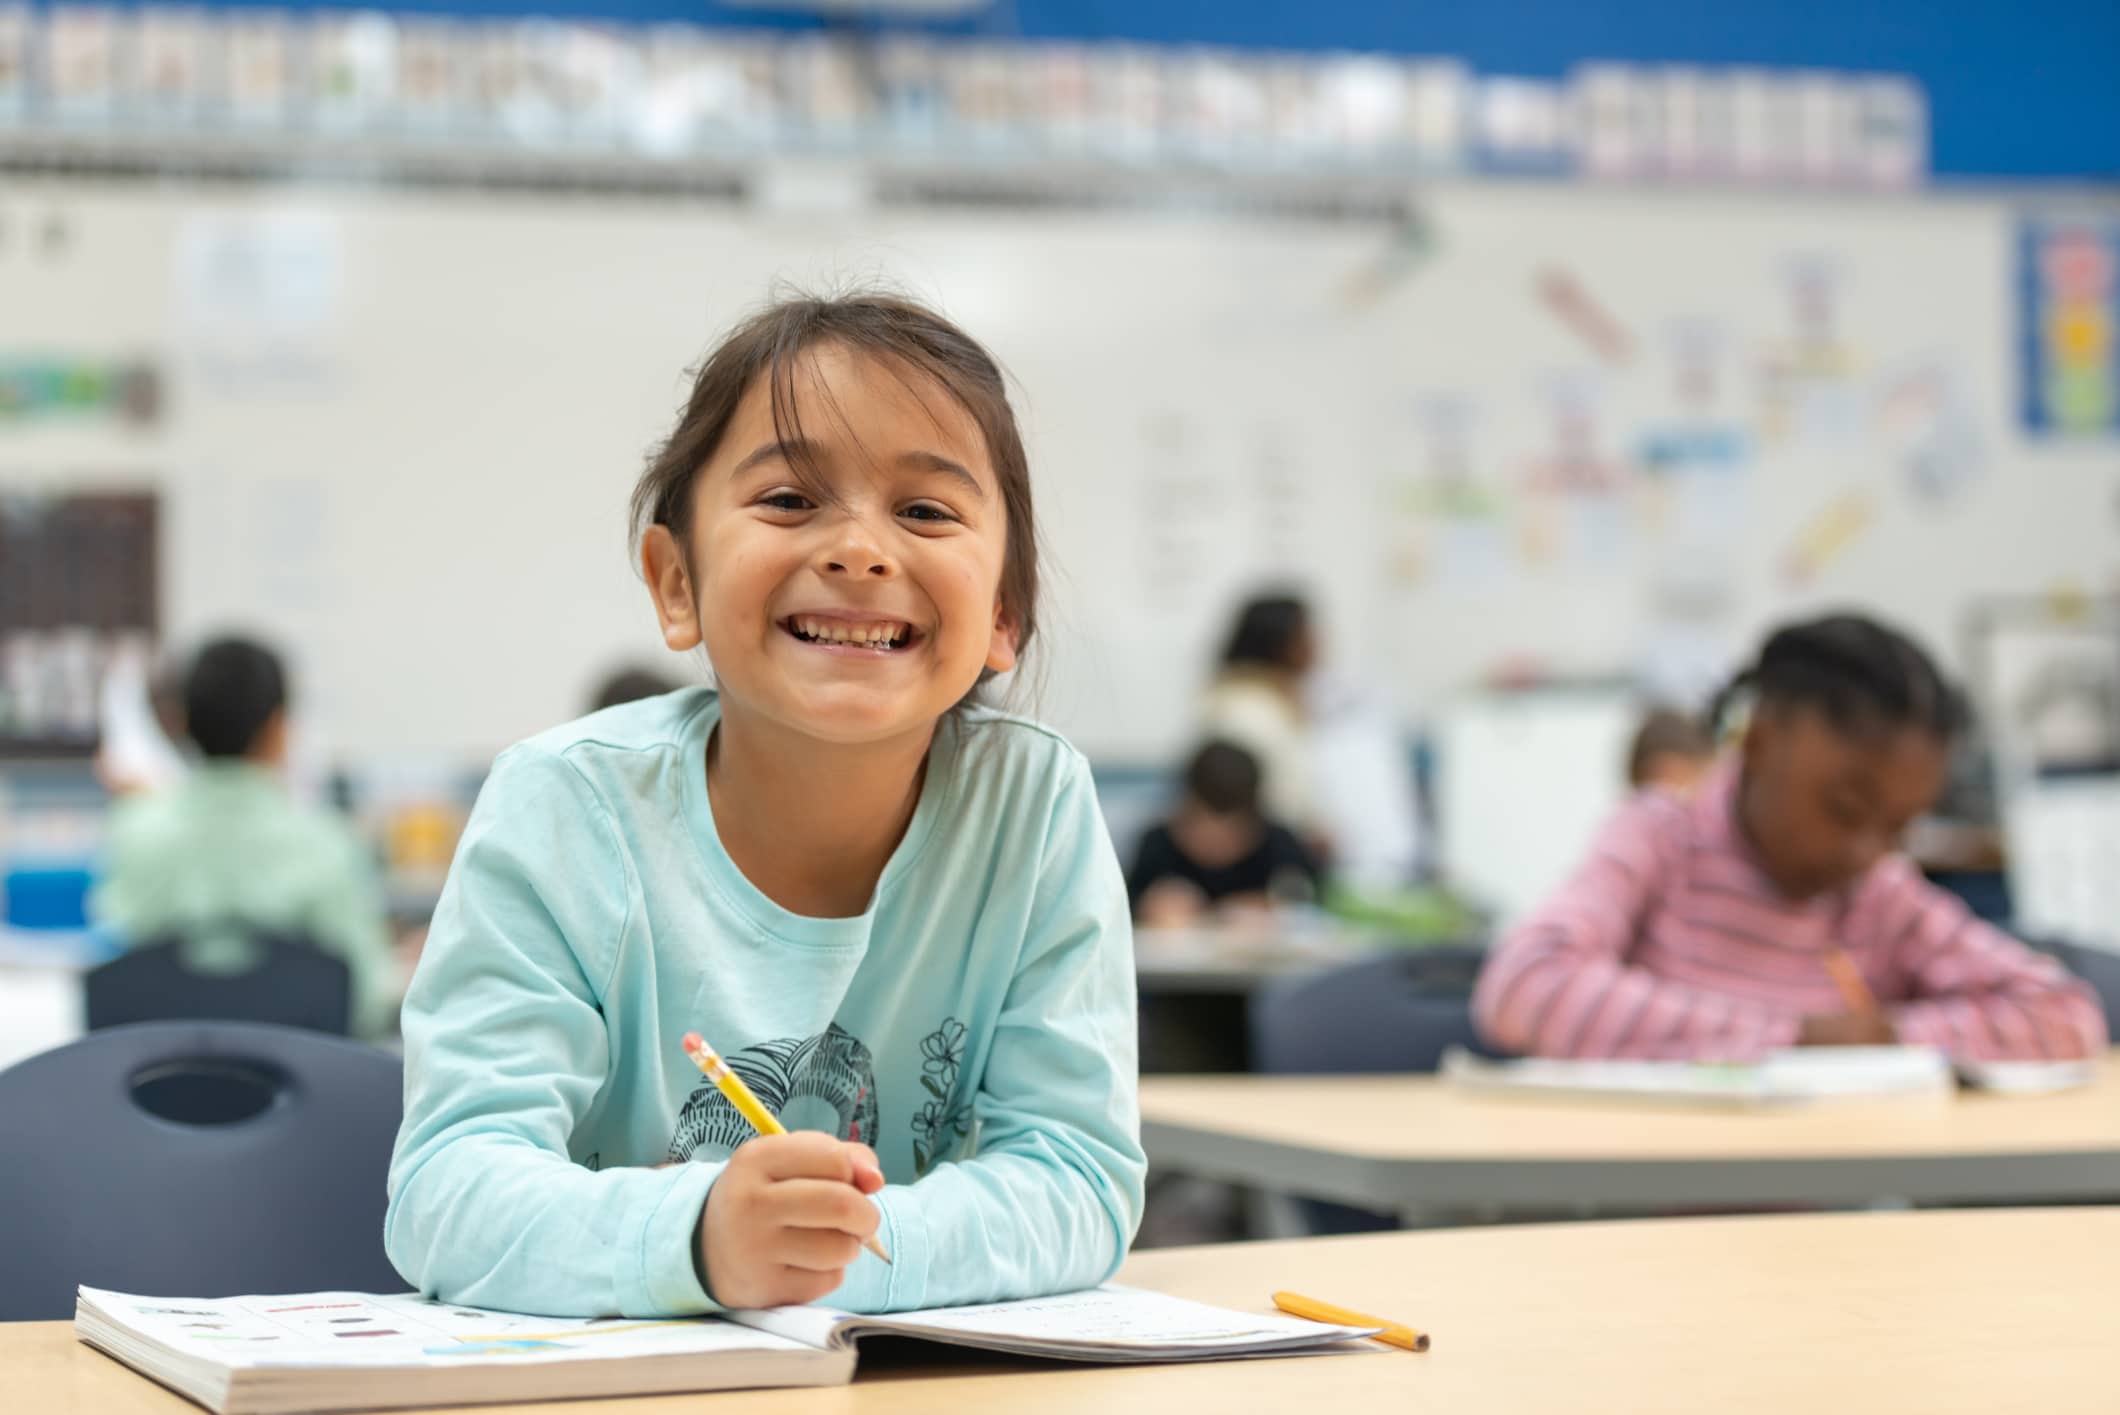 A cute little girl of spanish descent works hard on her in class assignment. She is working in her math workbook and smiling at the camera.